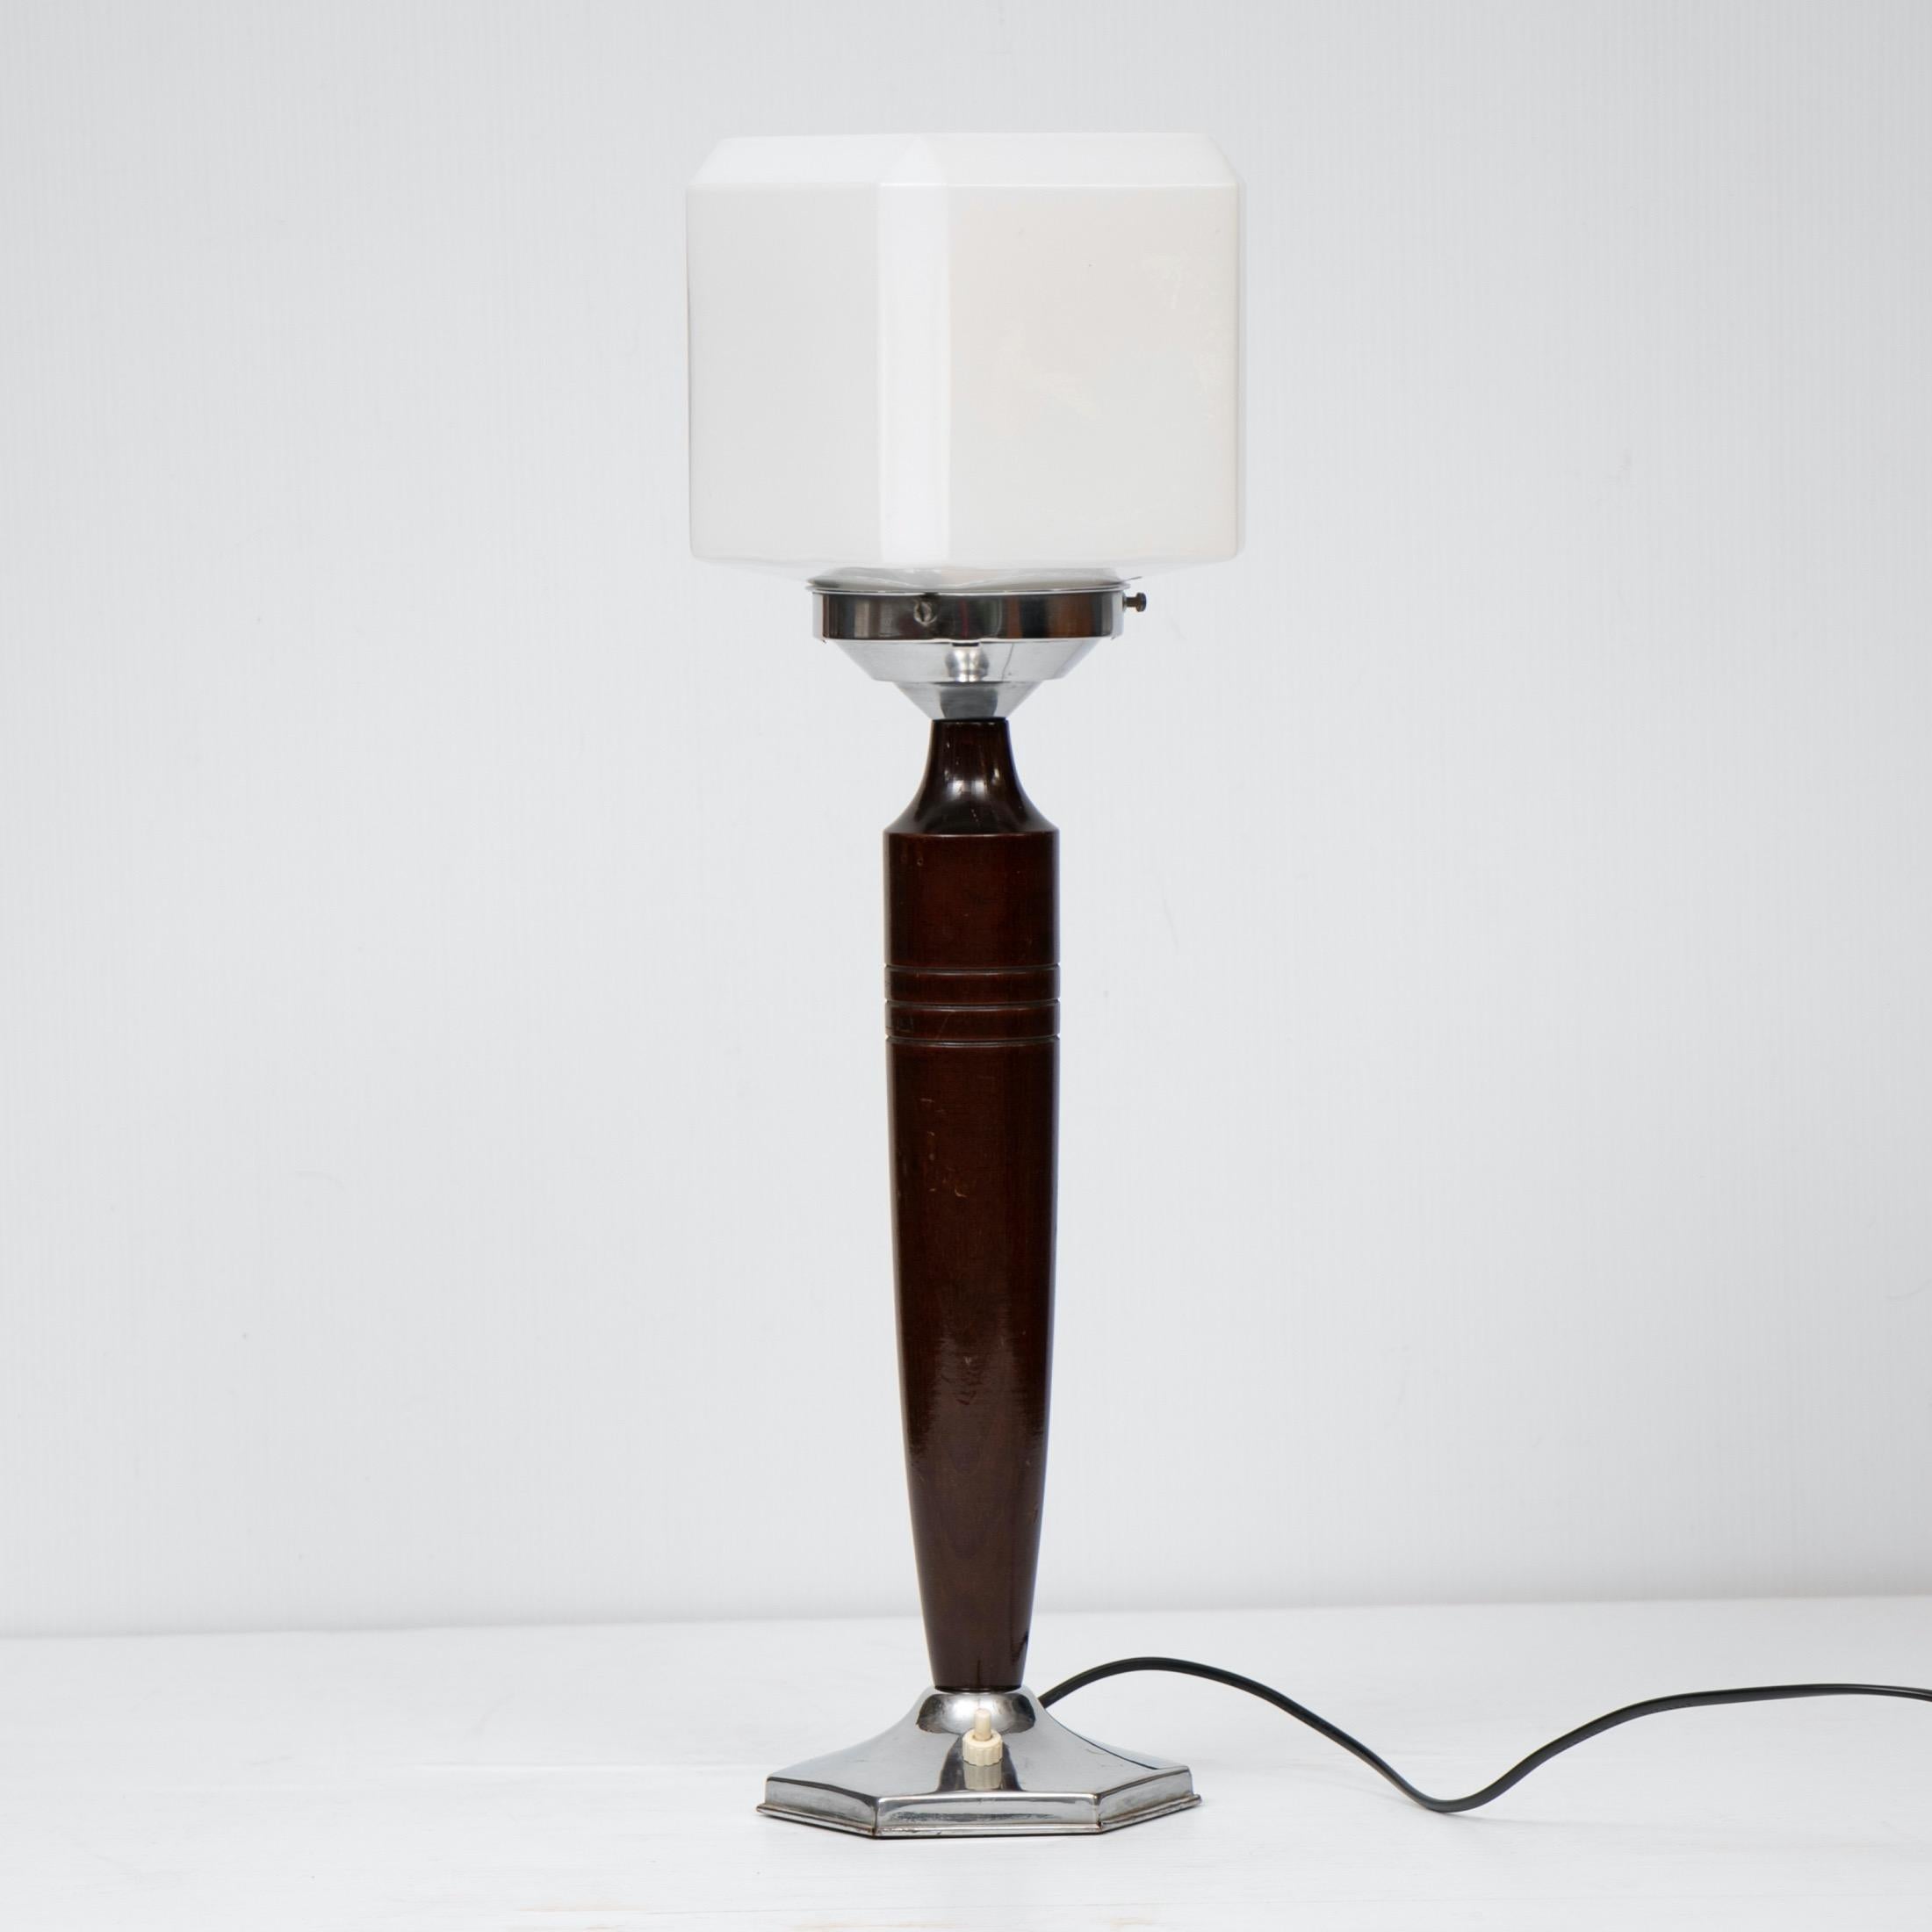 A British Art Deco table lamp with a polished walnut column and an original square opal glass shade.
The column in beautiful round tapered walnut on a chrome base with presell switch,
circa 1930
Measures: H 57.5cm W 15cm D 15cm.